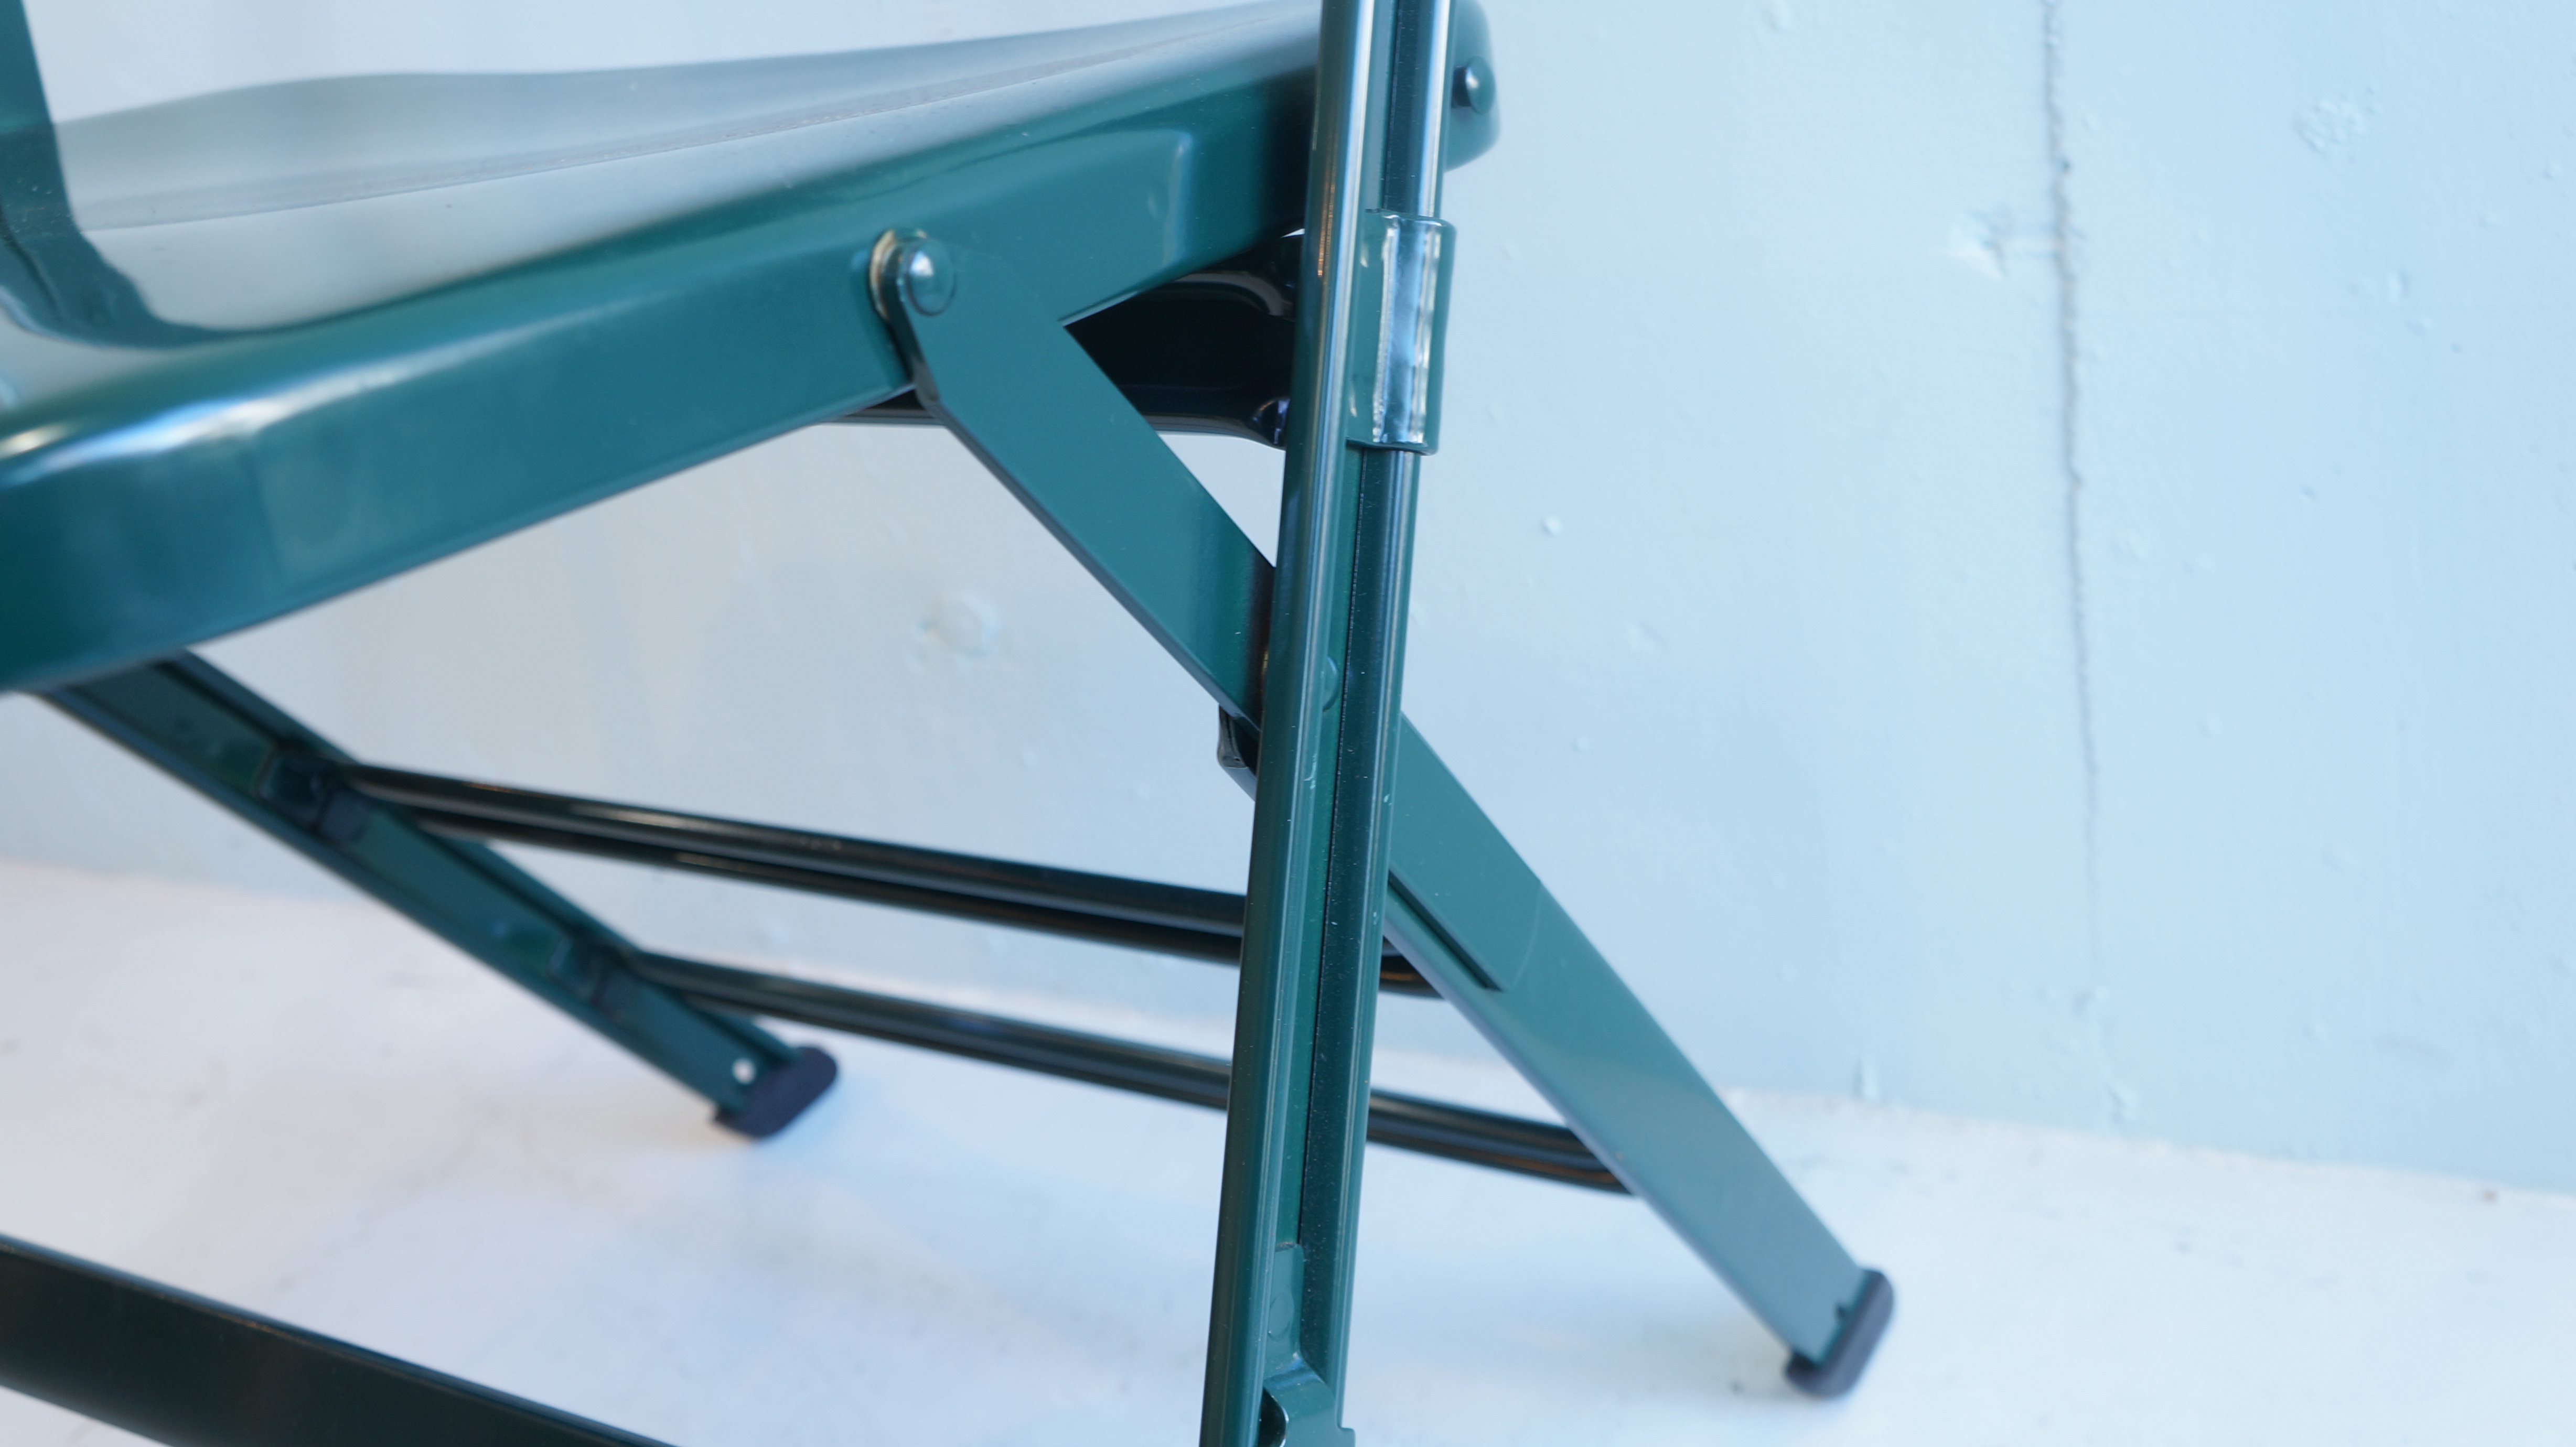 PACIFIC FURNITURE SERVICE ALL STEEL FOLDING CHAIR made by CLARIN USA / パシフィックファニチャーサービス クラリン社製 オールスチール フォールディングチェア アメリカ製